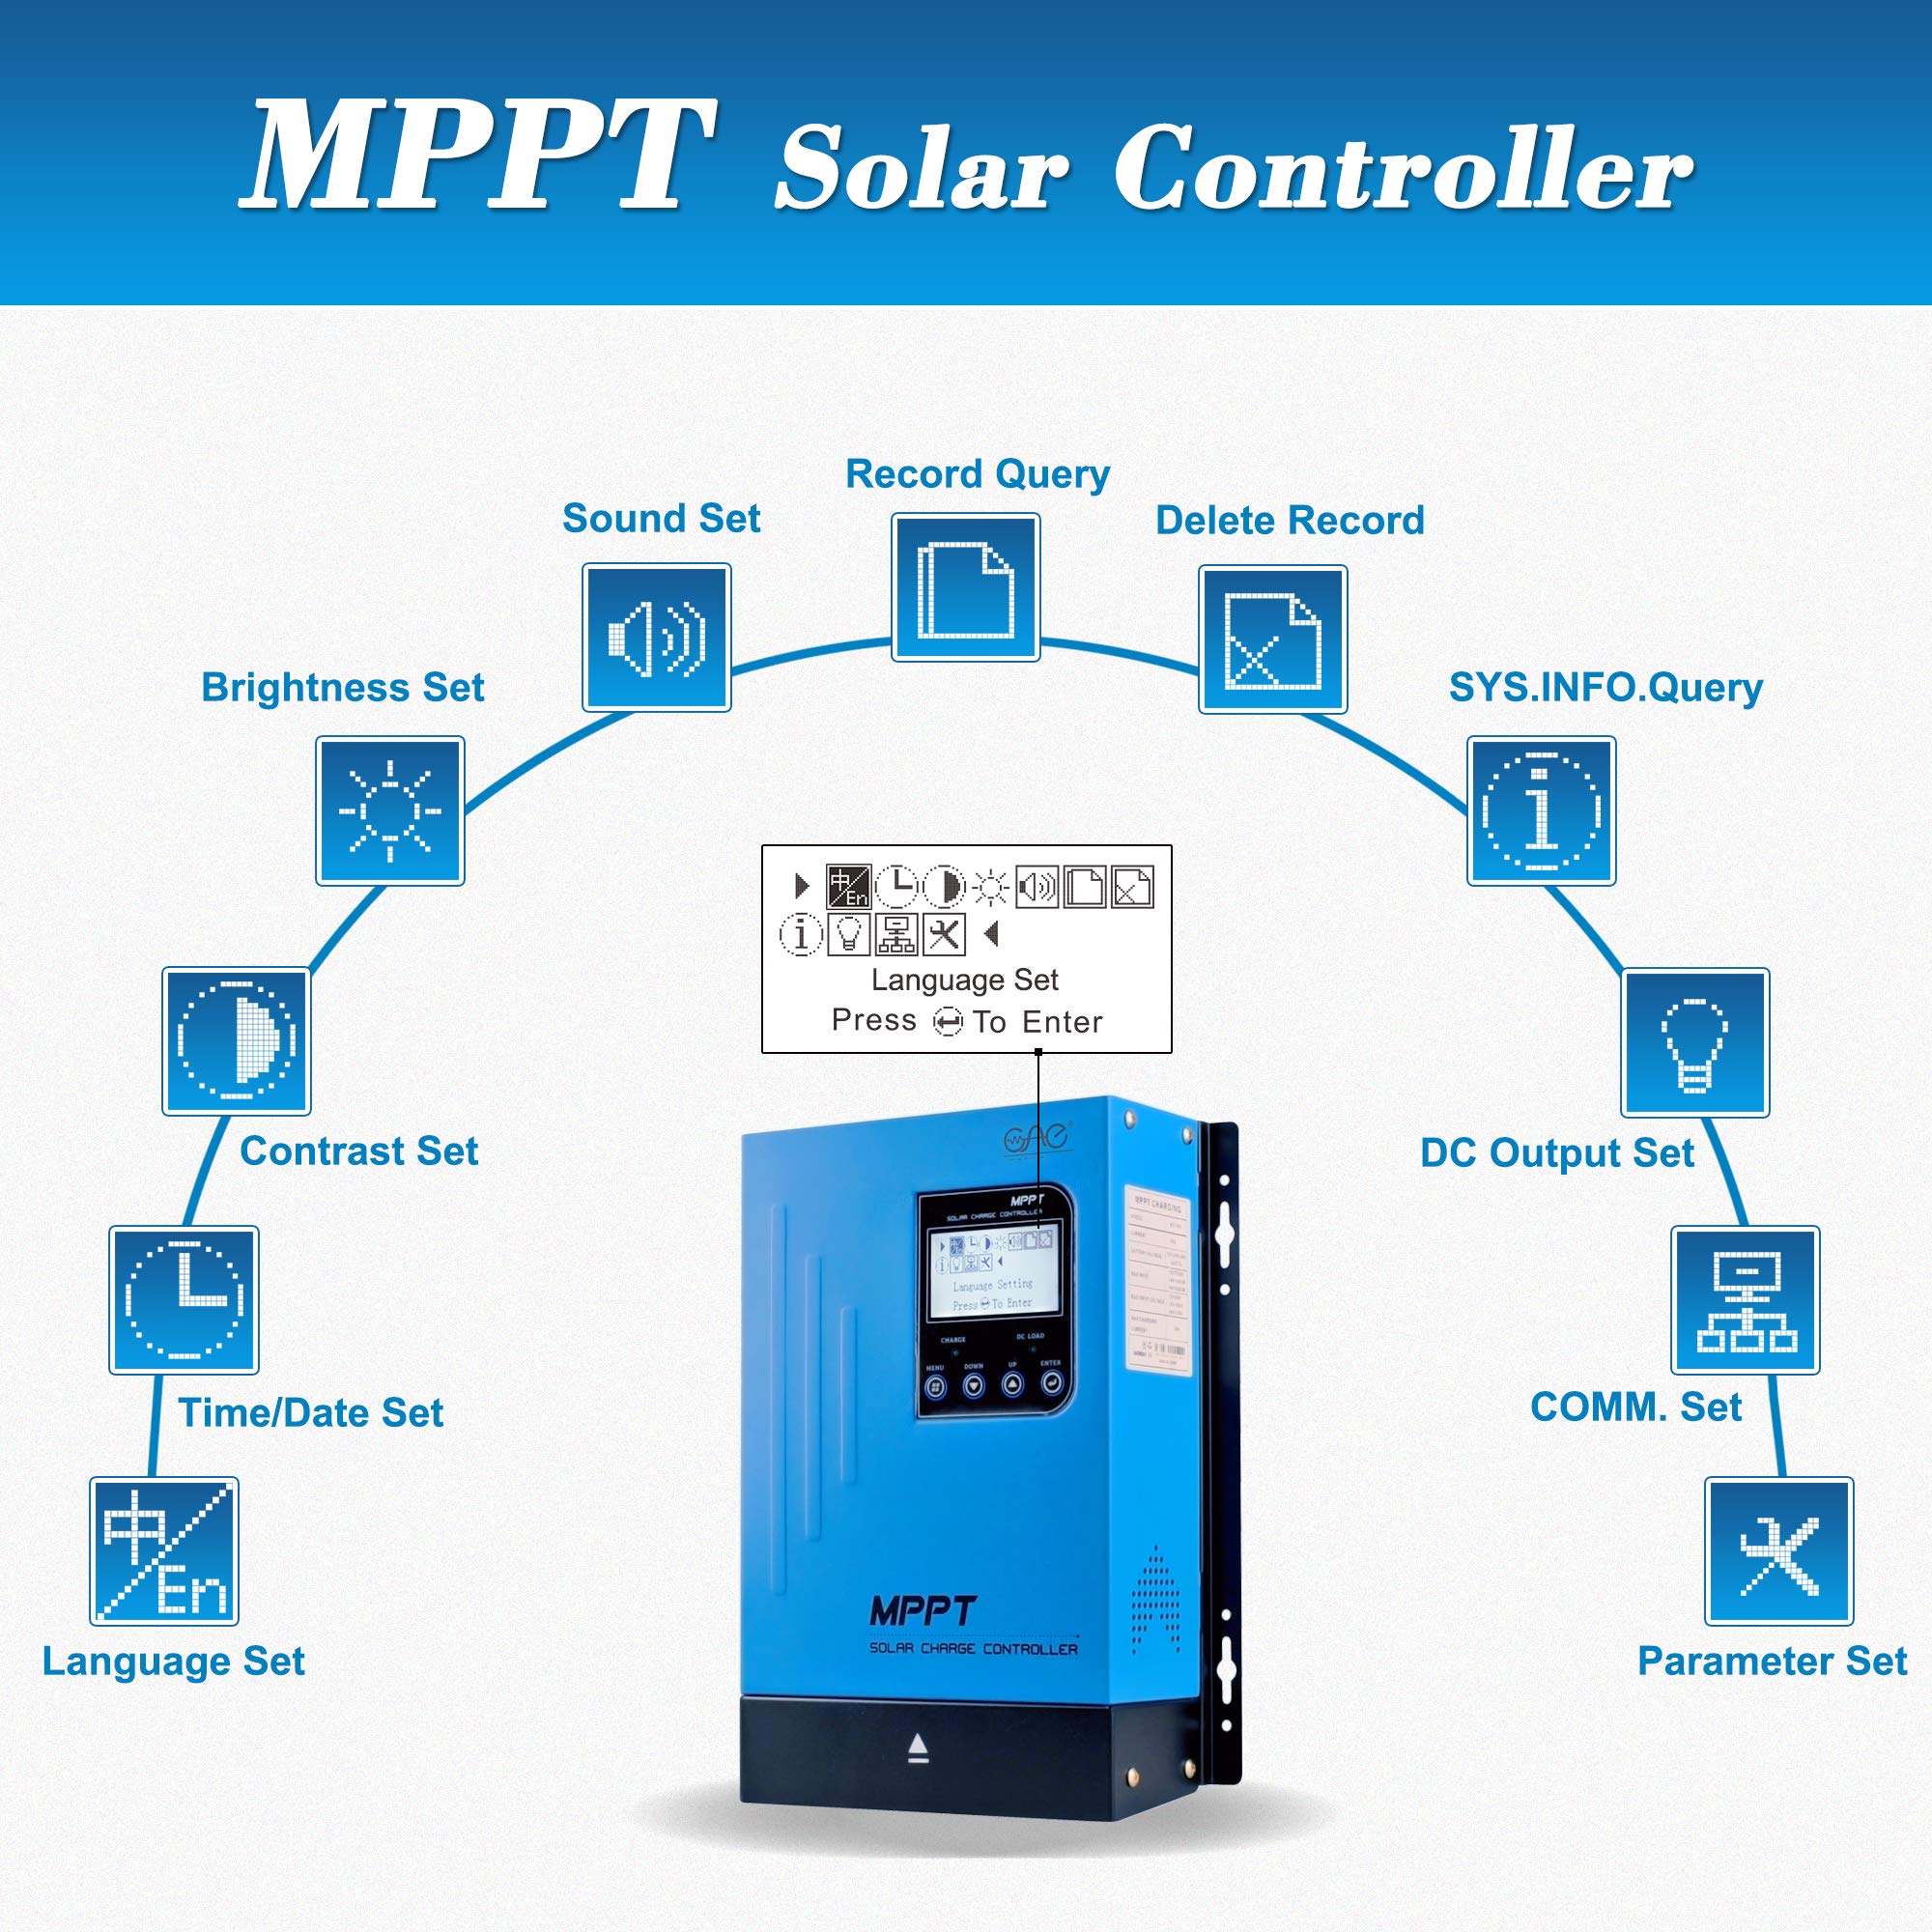 60A MPPT Solar Charge Controller 60amp Panel Battery Charger Controller 48V 36V 24V 12V Auto Max 150VDC Input mppt Charge Controllers Support Sealed Gel AGM Flooded Lithium Battery